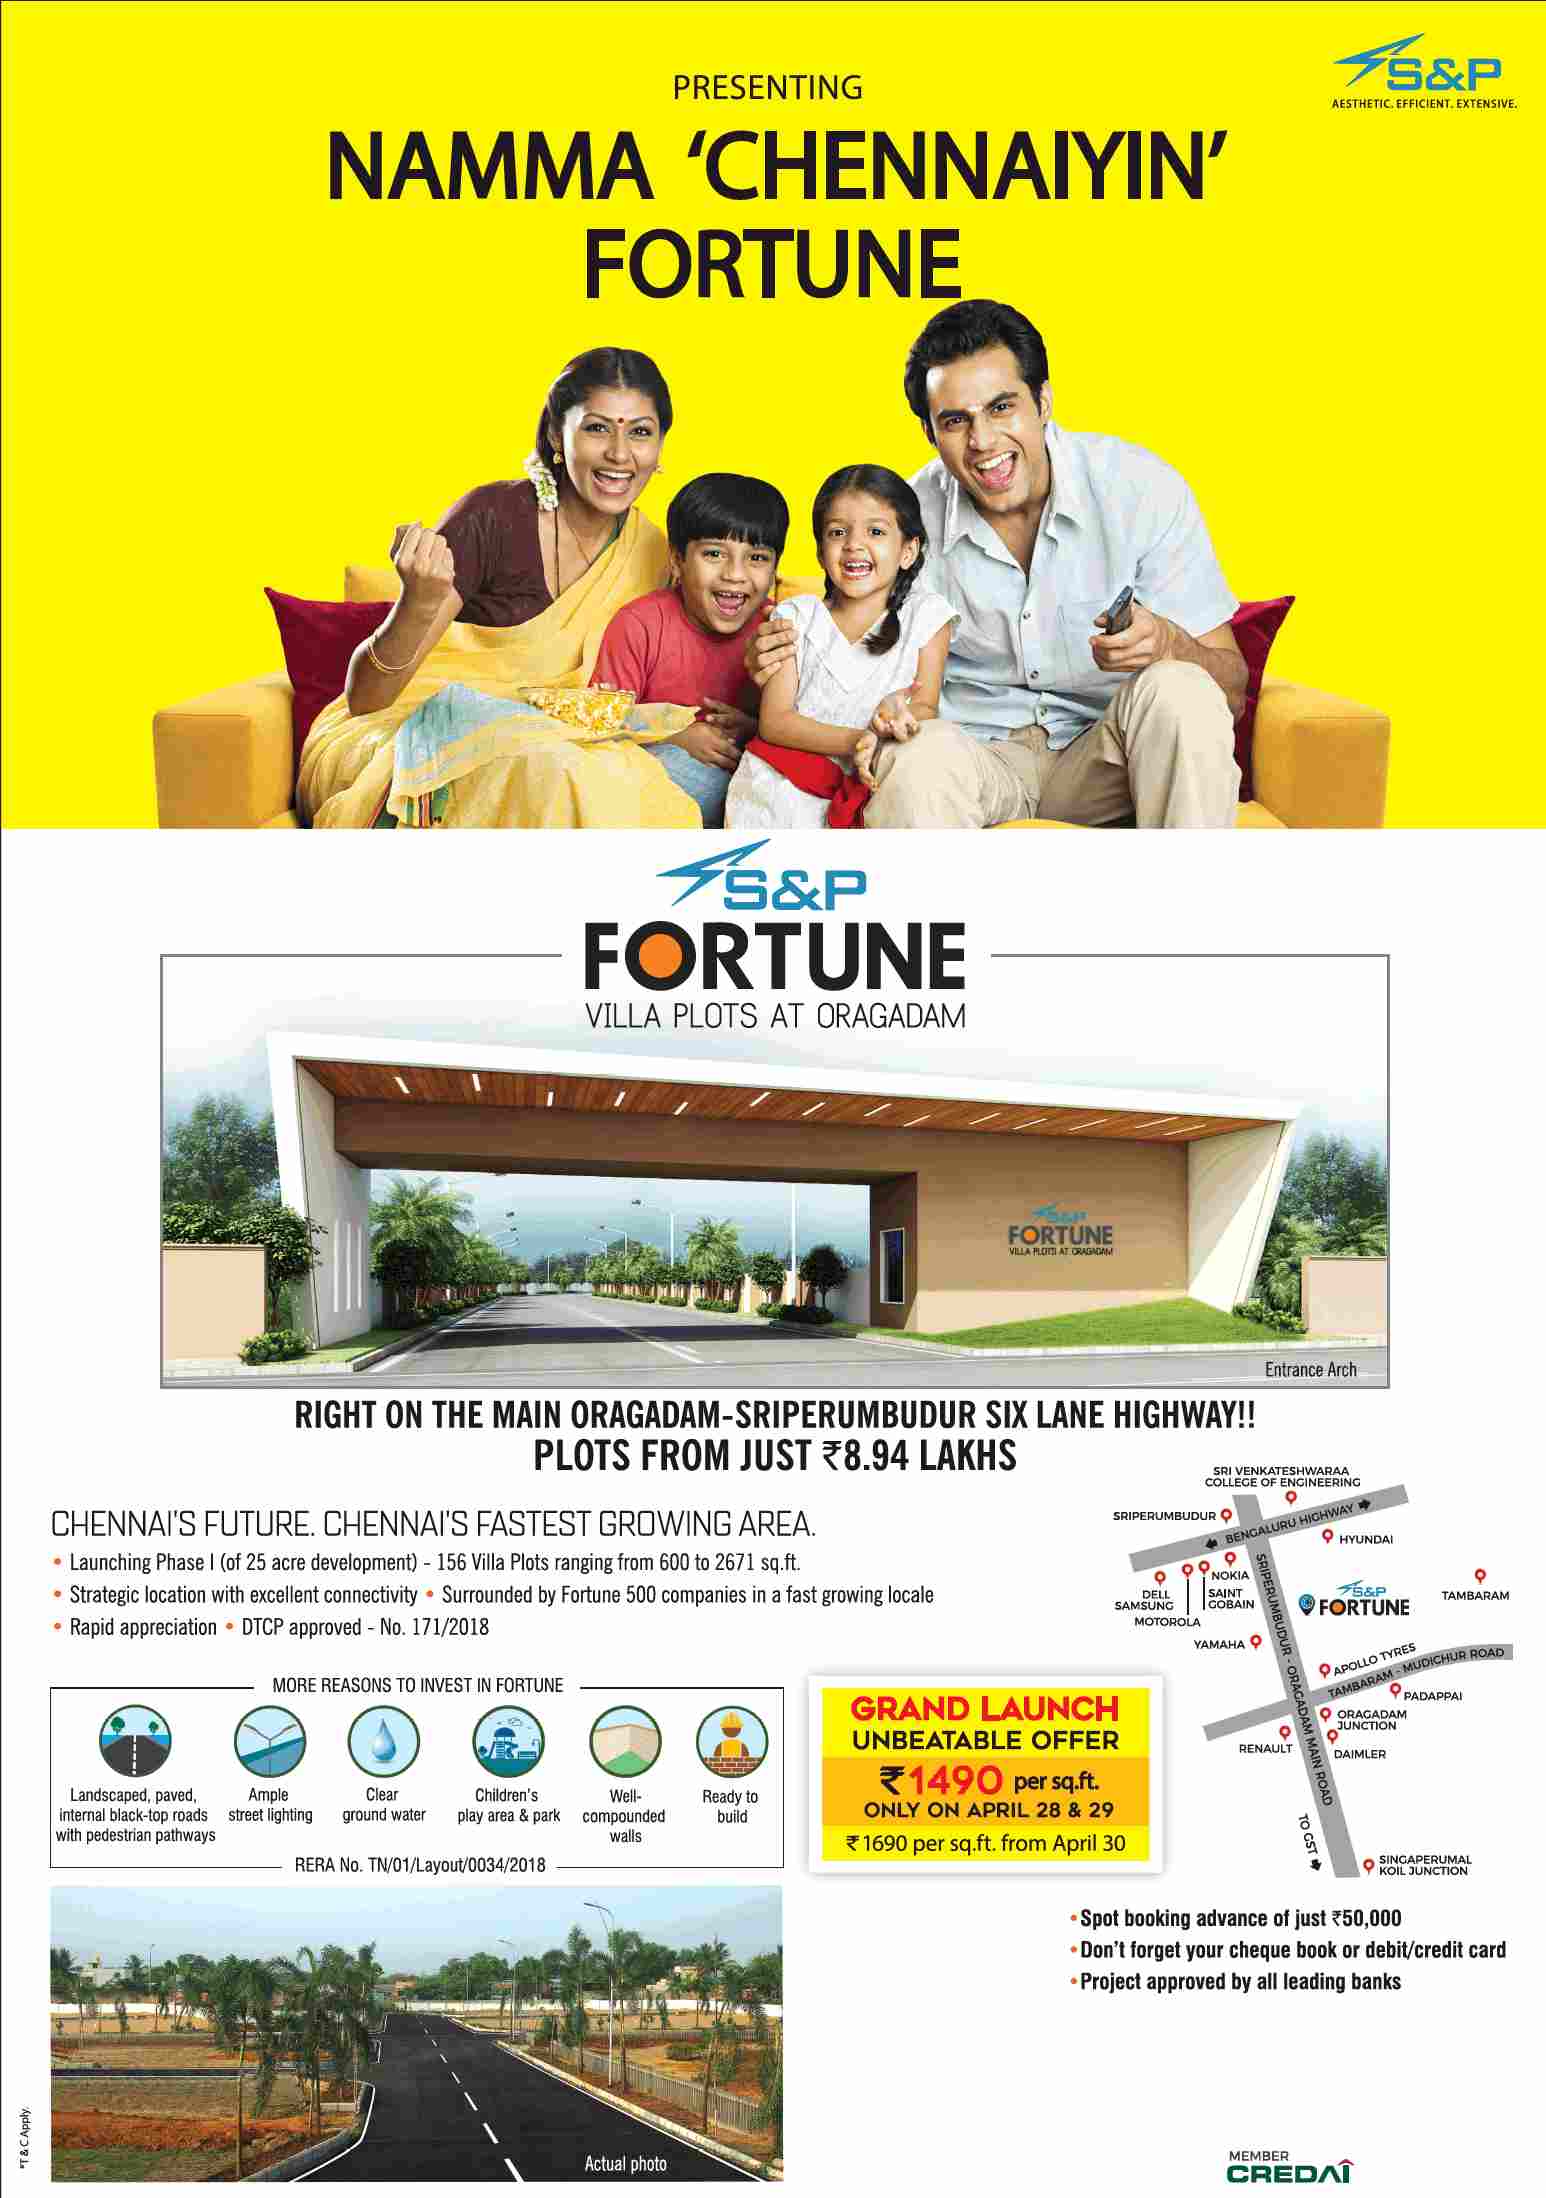 Book plots starting from Rs. 8.94 Lakhs at S&P Fortune in Chennai Update